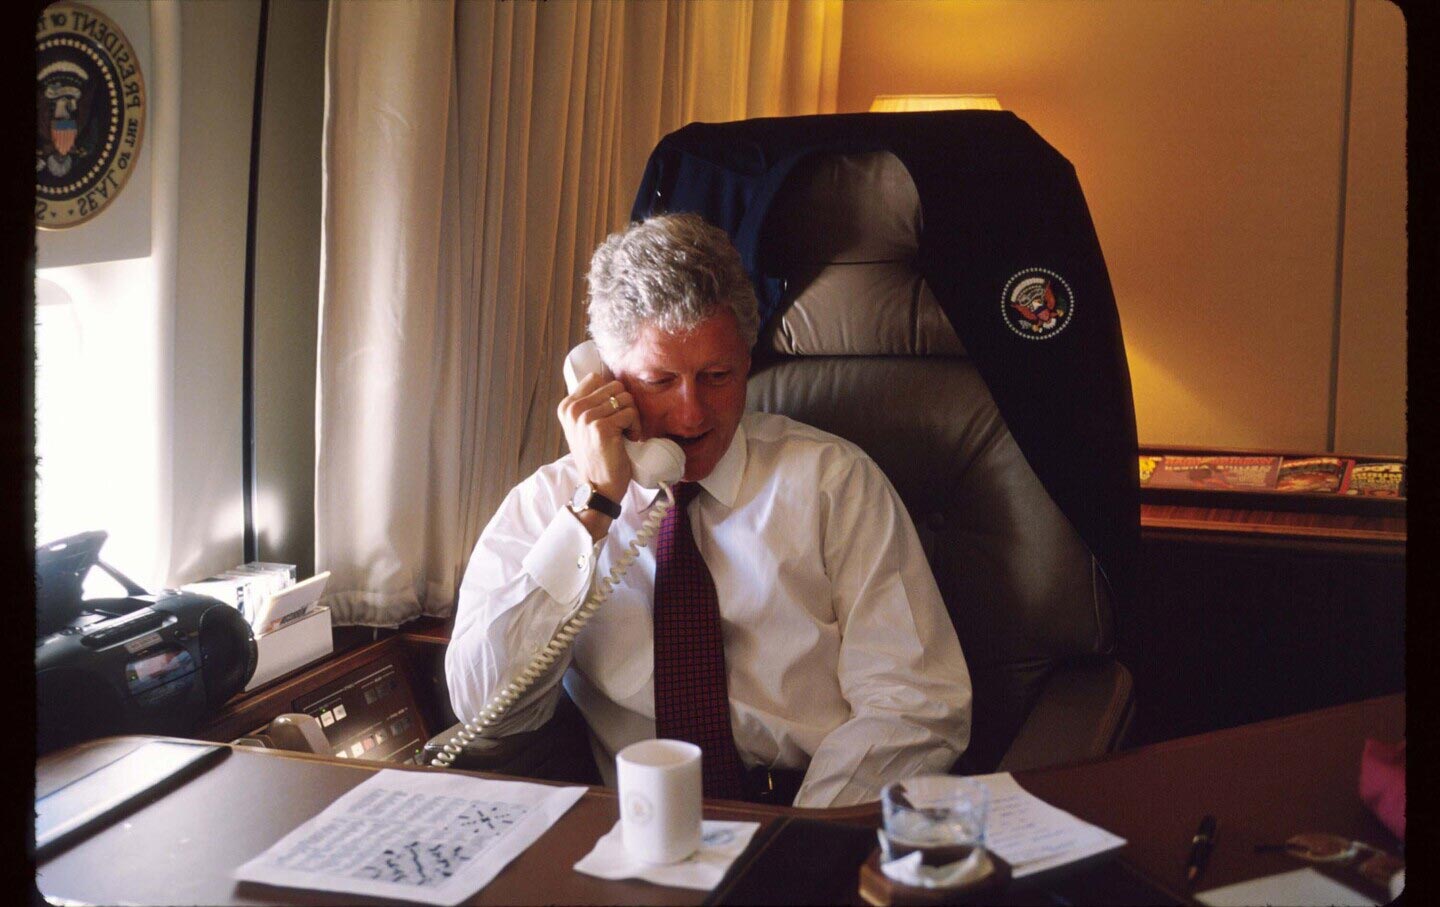 President Clinton speaks on the phone while on Air Force One, November 2, 1997, in the United States.